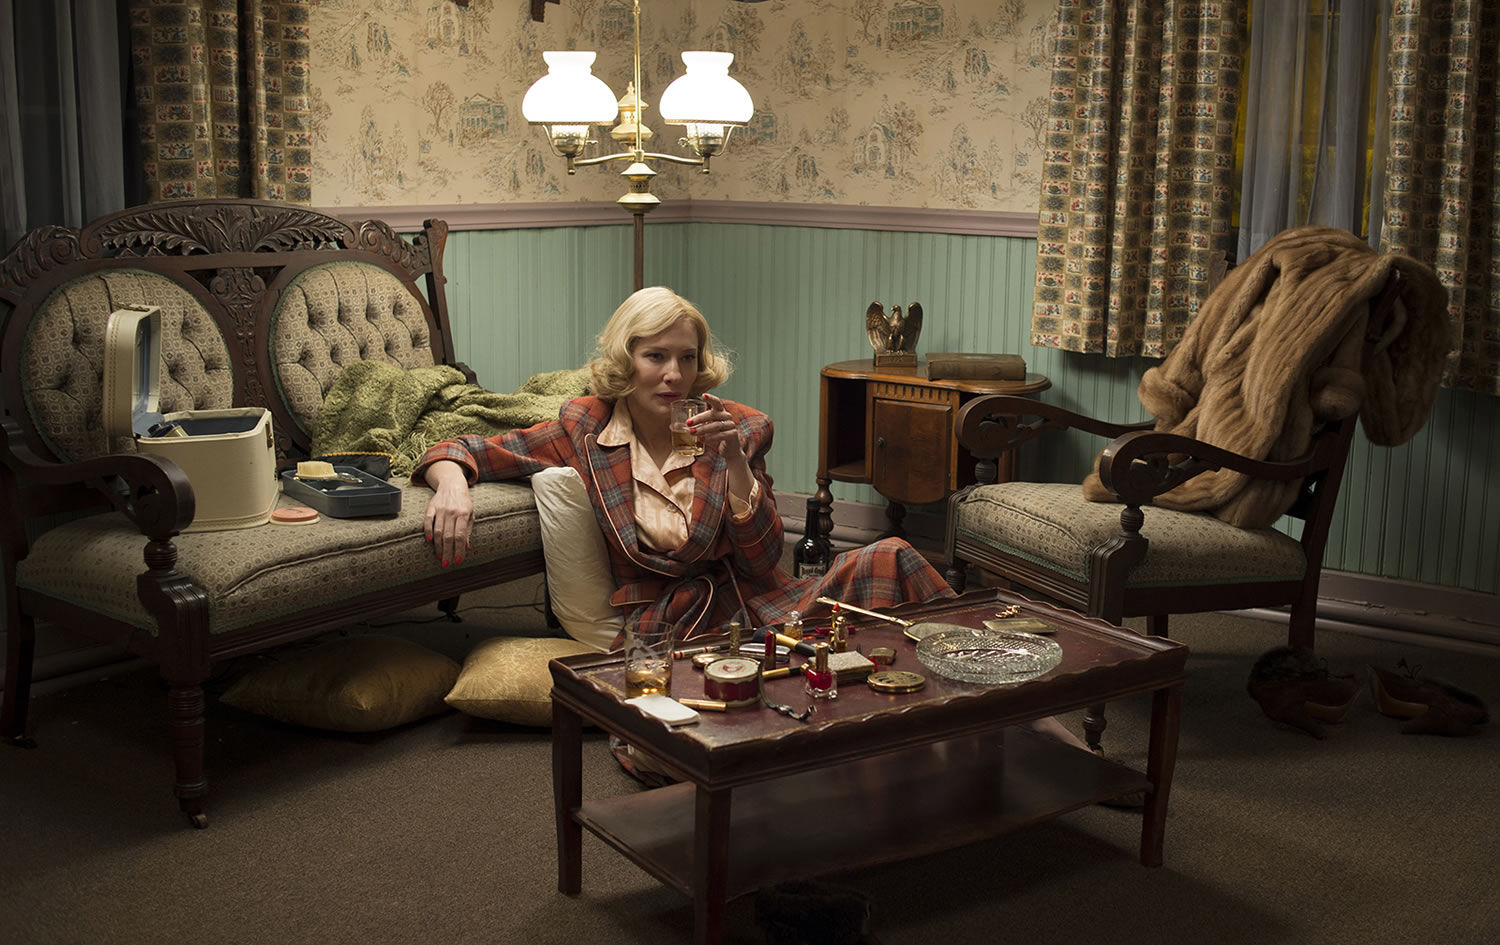 Cate Blanchett stars in &quot;Carol.&quot; (Photos by The Weinstein Company)